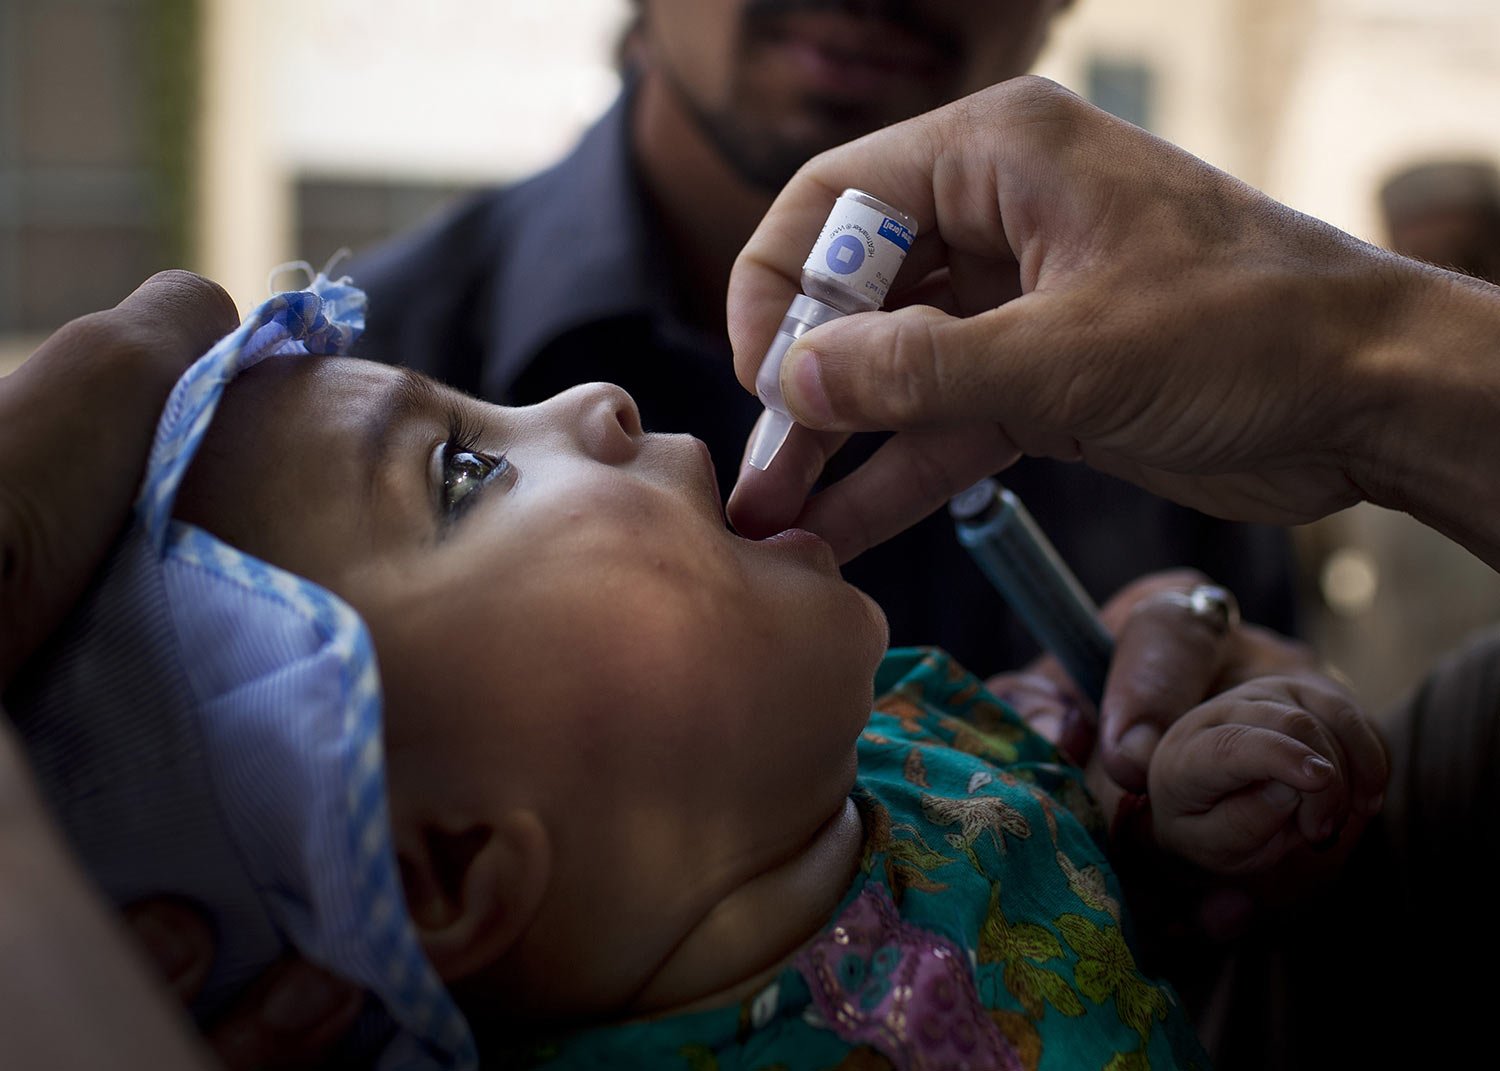  A child is administered a polio vaccination by a district health team worker outside a children's hospital in Peshawar, Pakistan on Wednesday, May 30, 2012. (AP Photo/Anja Niedringhaus) 